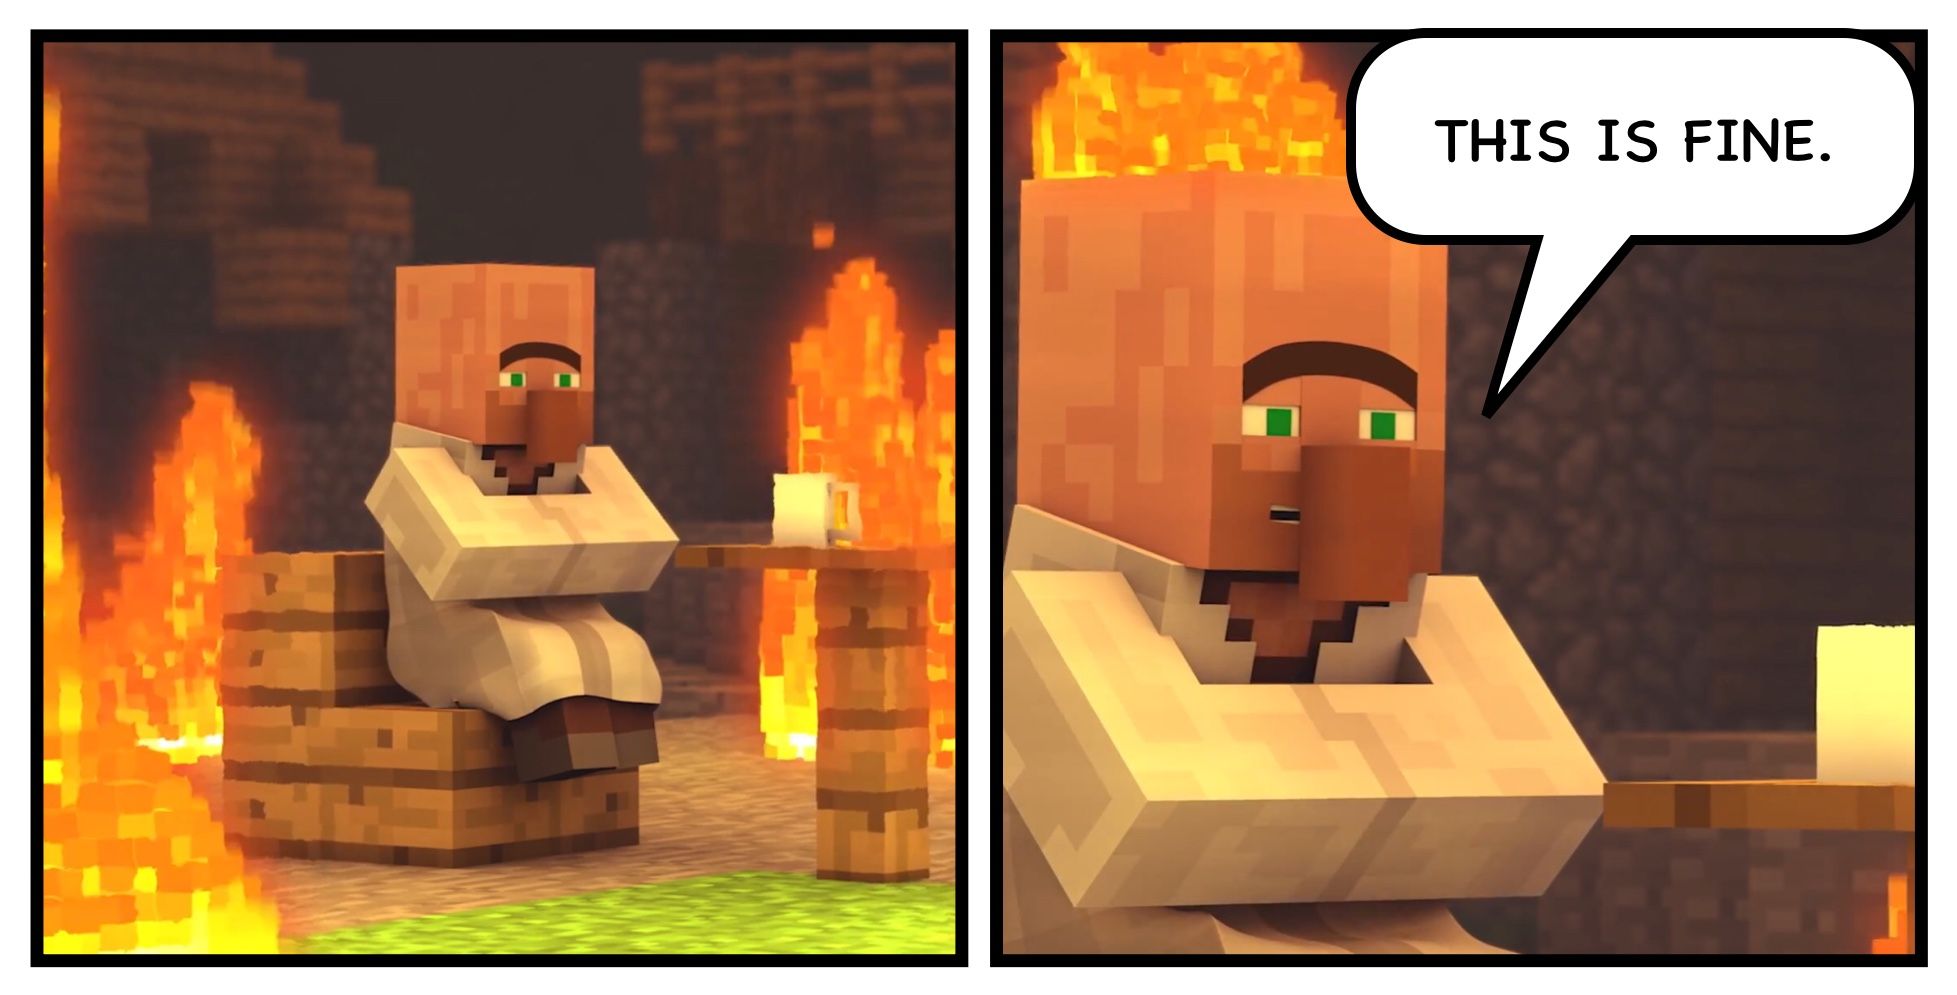 High Quality This is fine villager news edition Blank Meme Template